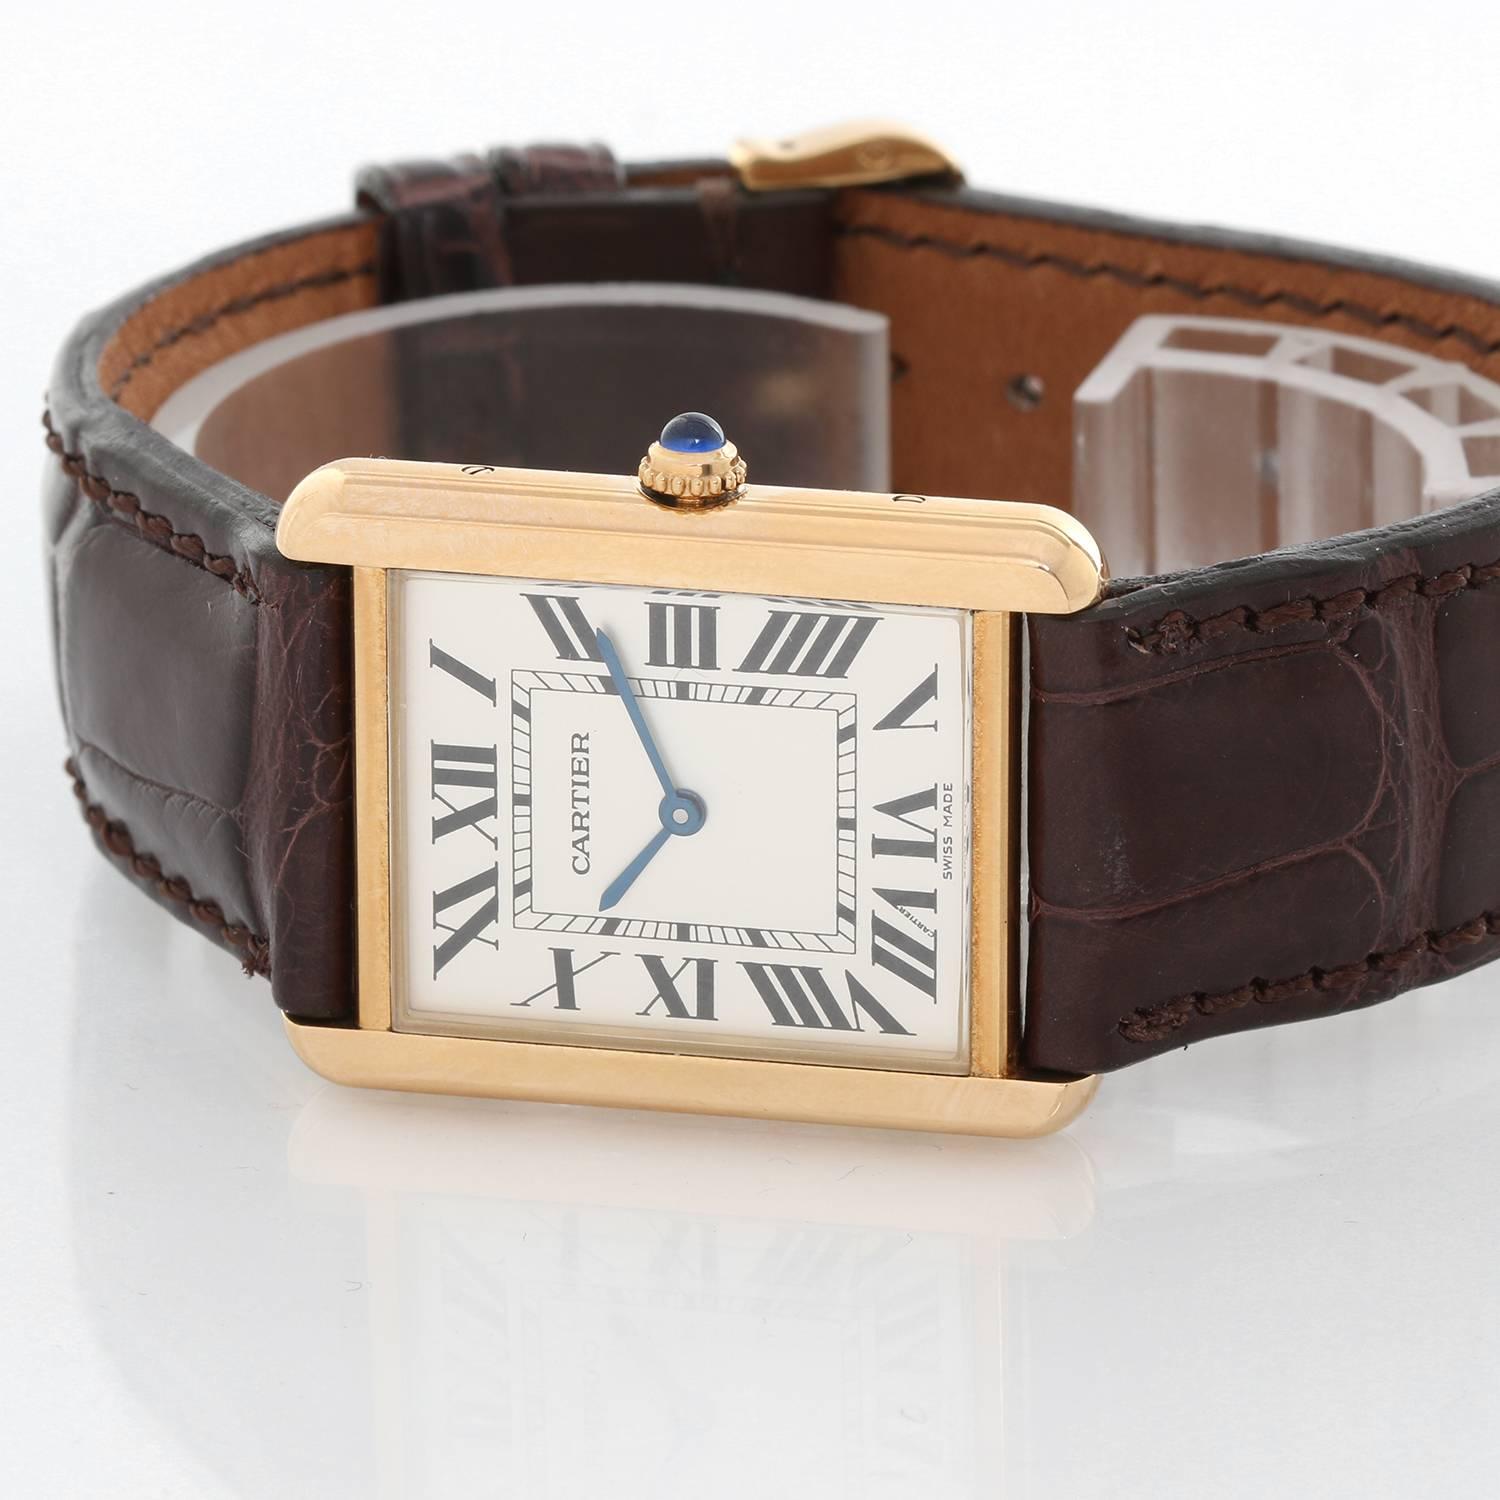 Cartier Tank Solo 18K Yellow Gold Men's Watch W1018855 -  Quartz movement. 18k yellow gold case with stainless steel back (27mm x 34mm). Ivory colored dial with black Roman numerals. Cartier strap band with 18k yellow gold Cartier buckle. Pre-owned